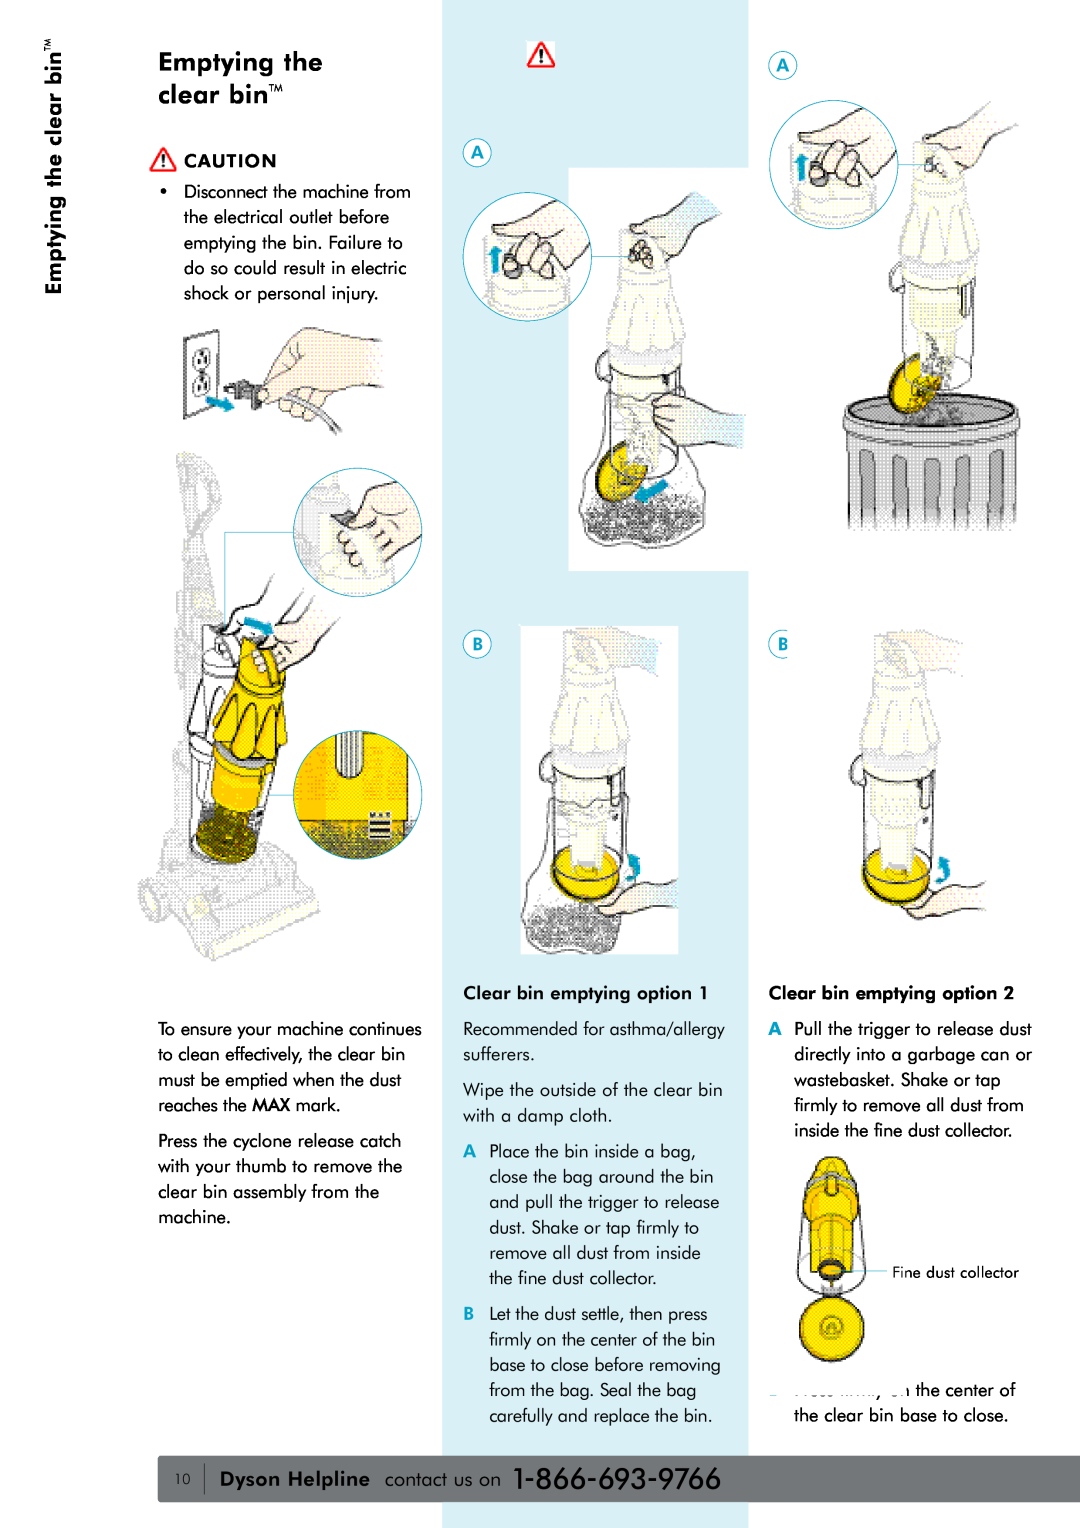 Dyson water filter owner manual Emptying the clear binTM, Dyson Helpline contact us on 